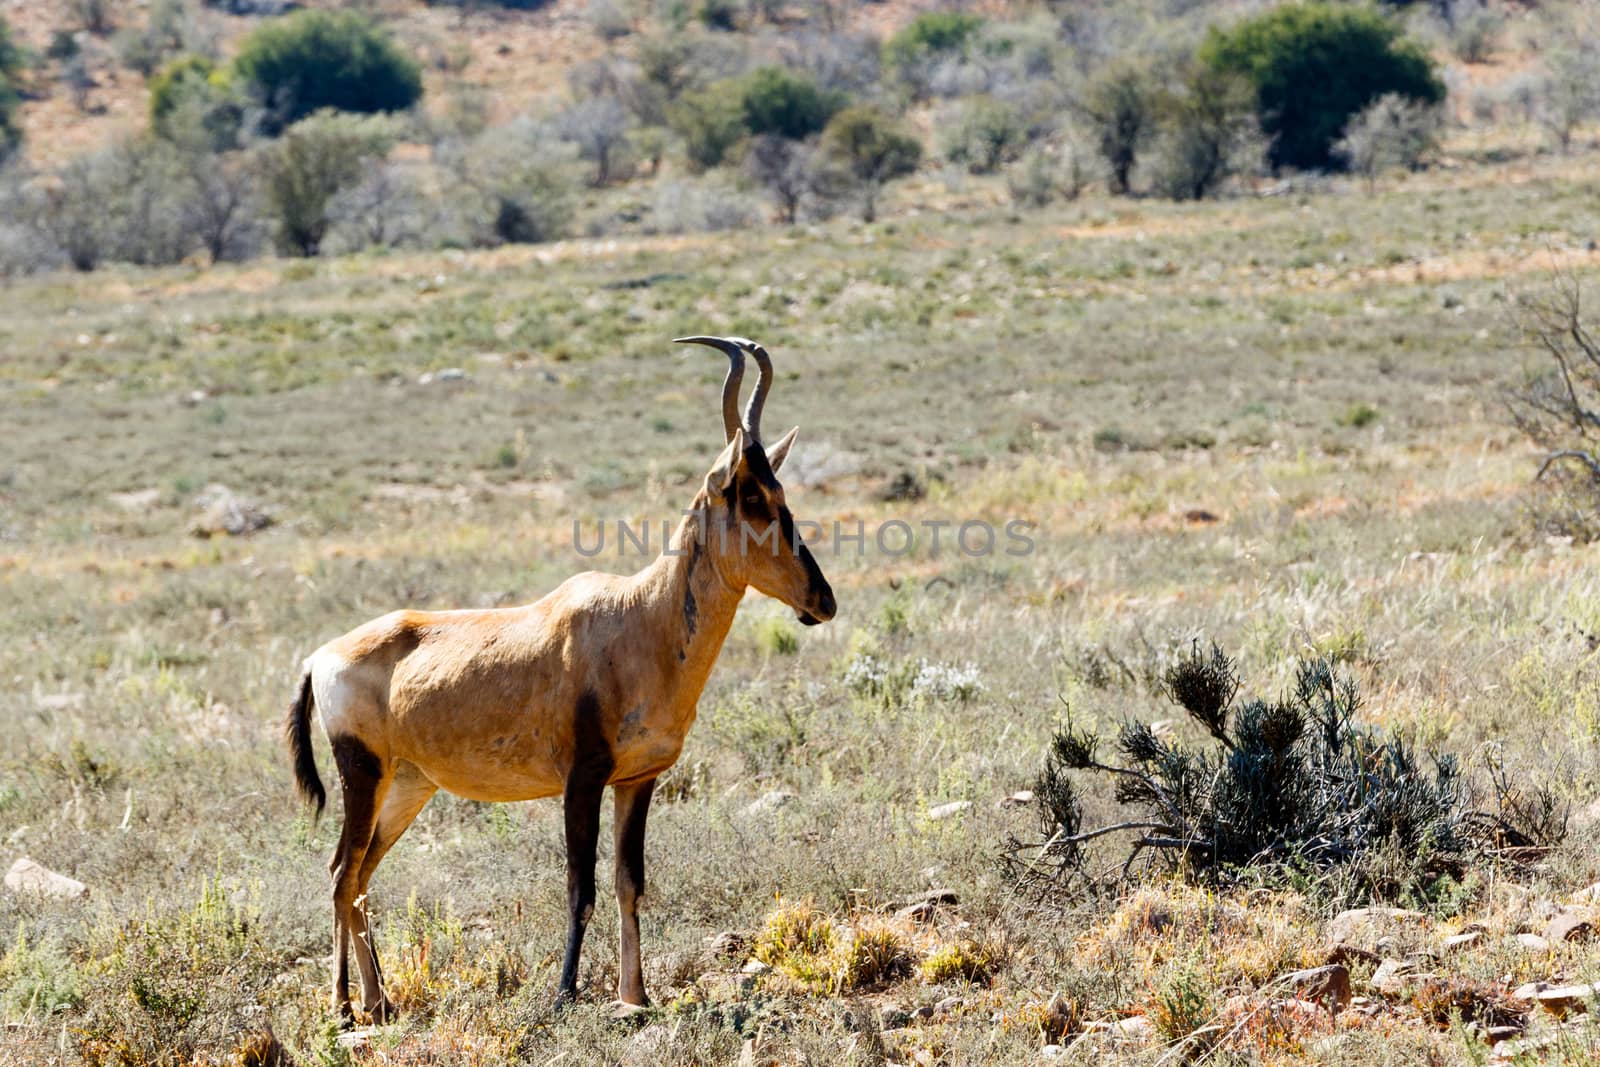 The side view of the Red Hartebeest standing in the field surrounded with bushes.